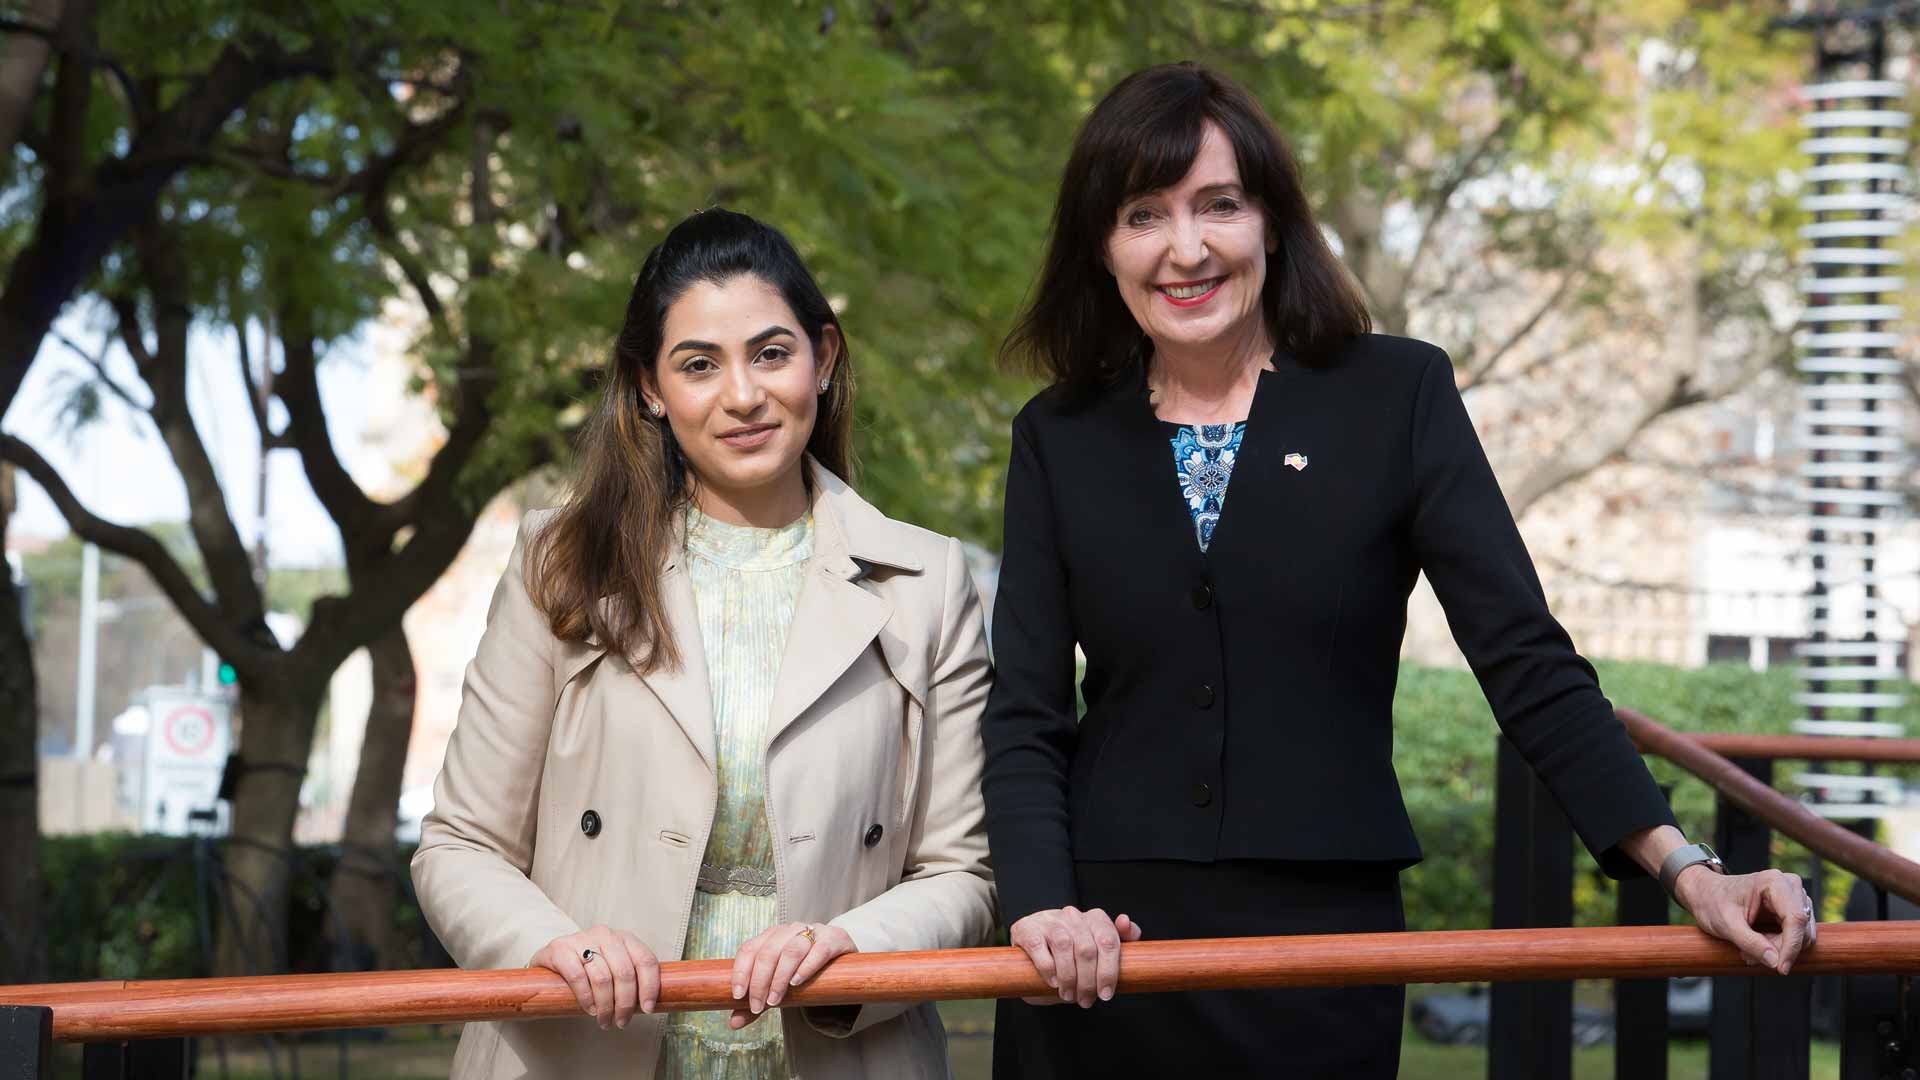 A woman in a navy suit and a younger woman in beige jacket pose smiling in front of trees and greenery.